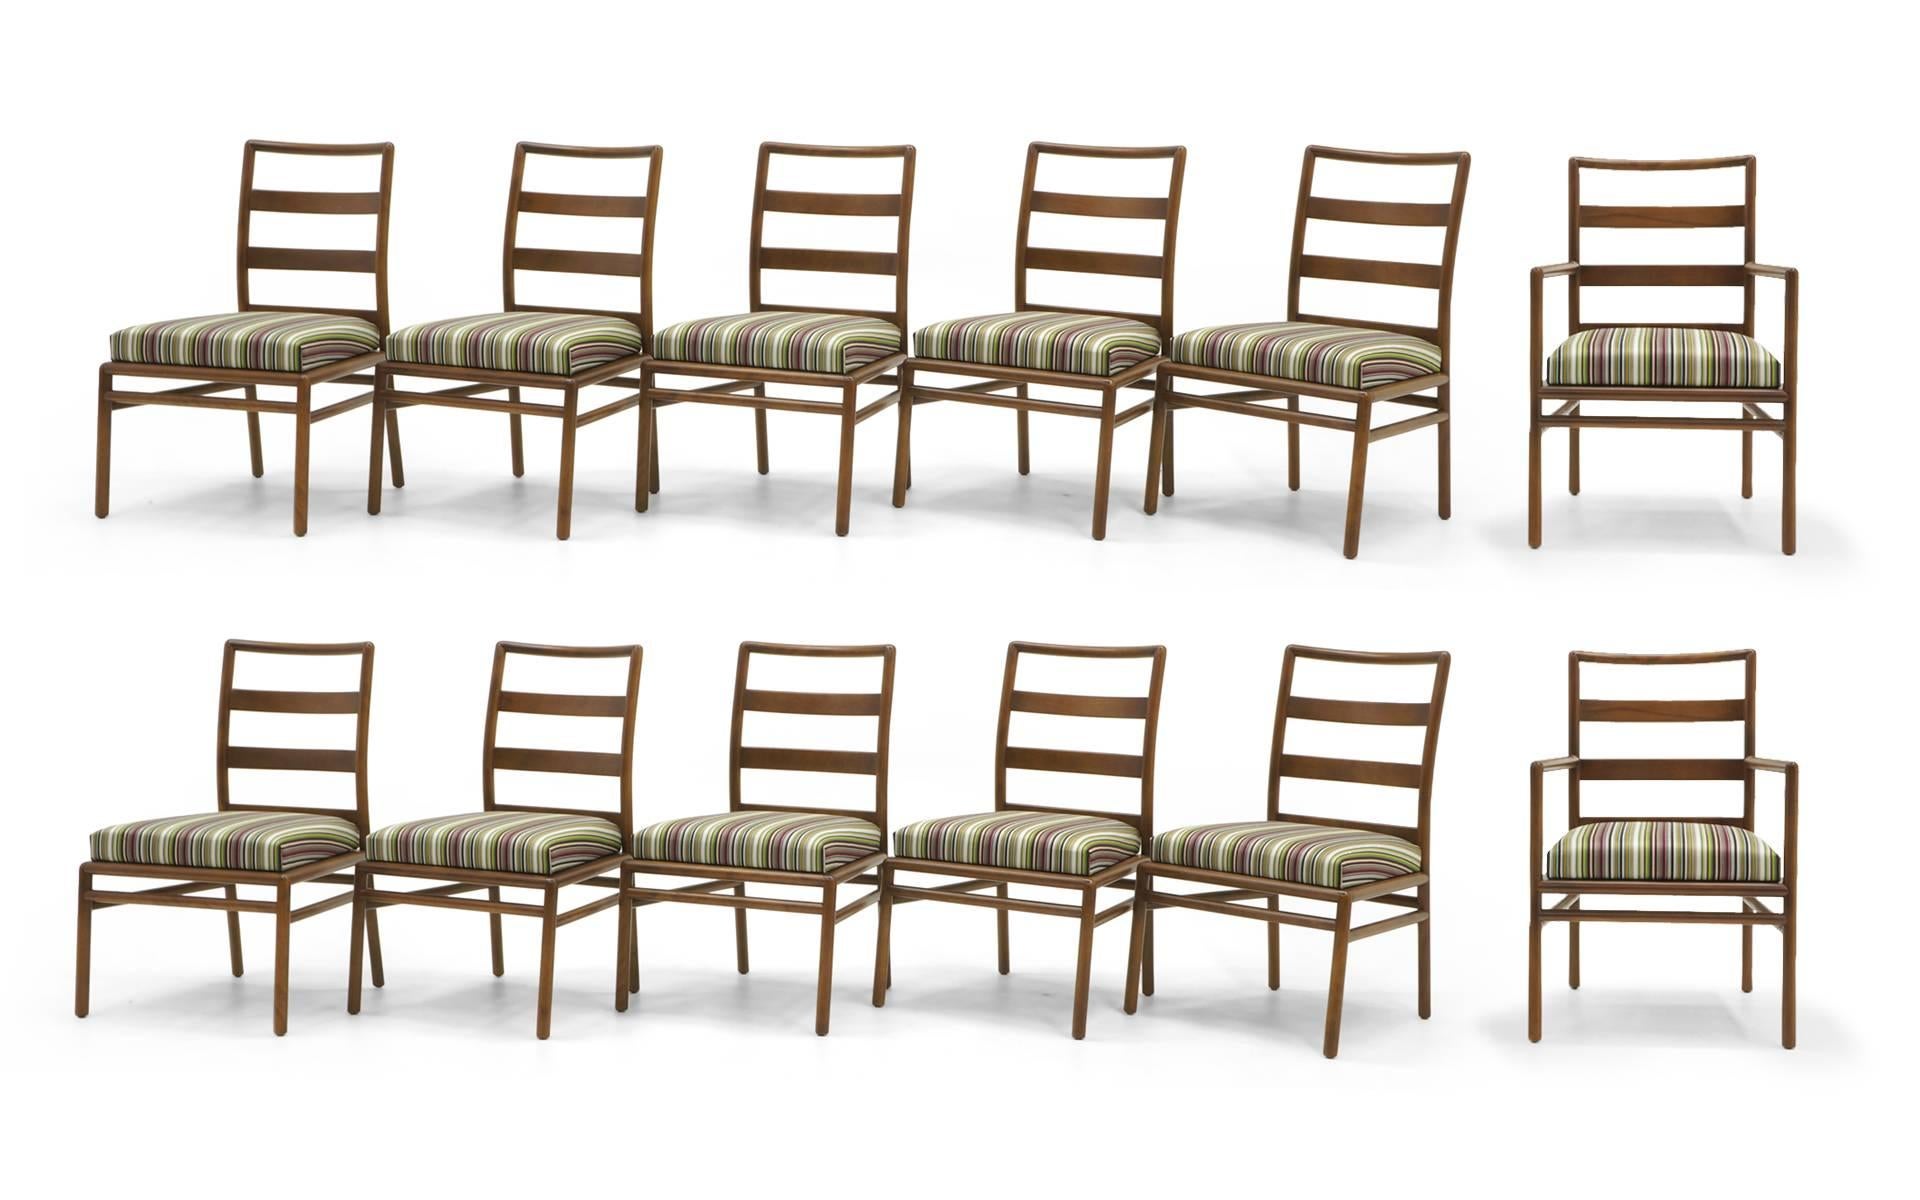 Set of 12 T.H. Robsjohn-Gibbings dining chairs for Widdicomb. Completely restored and reupholstered in Paul Smith stripe fabric by Maharam. These are wide, extremely well made and sturdy ladder back chairs. A beautiful set. Ten armless side chairs